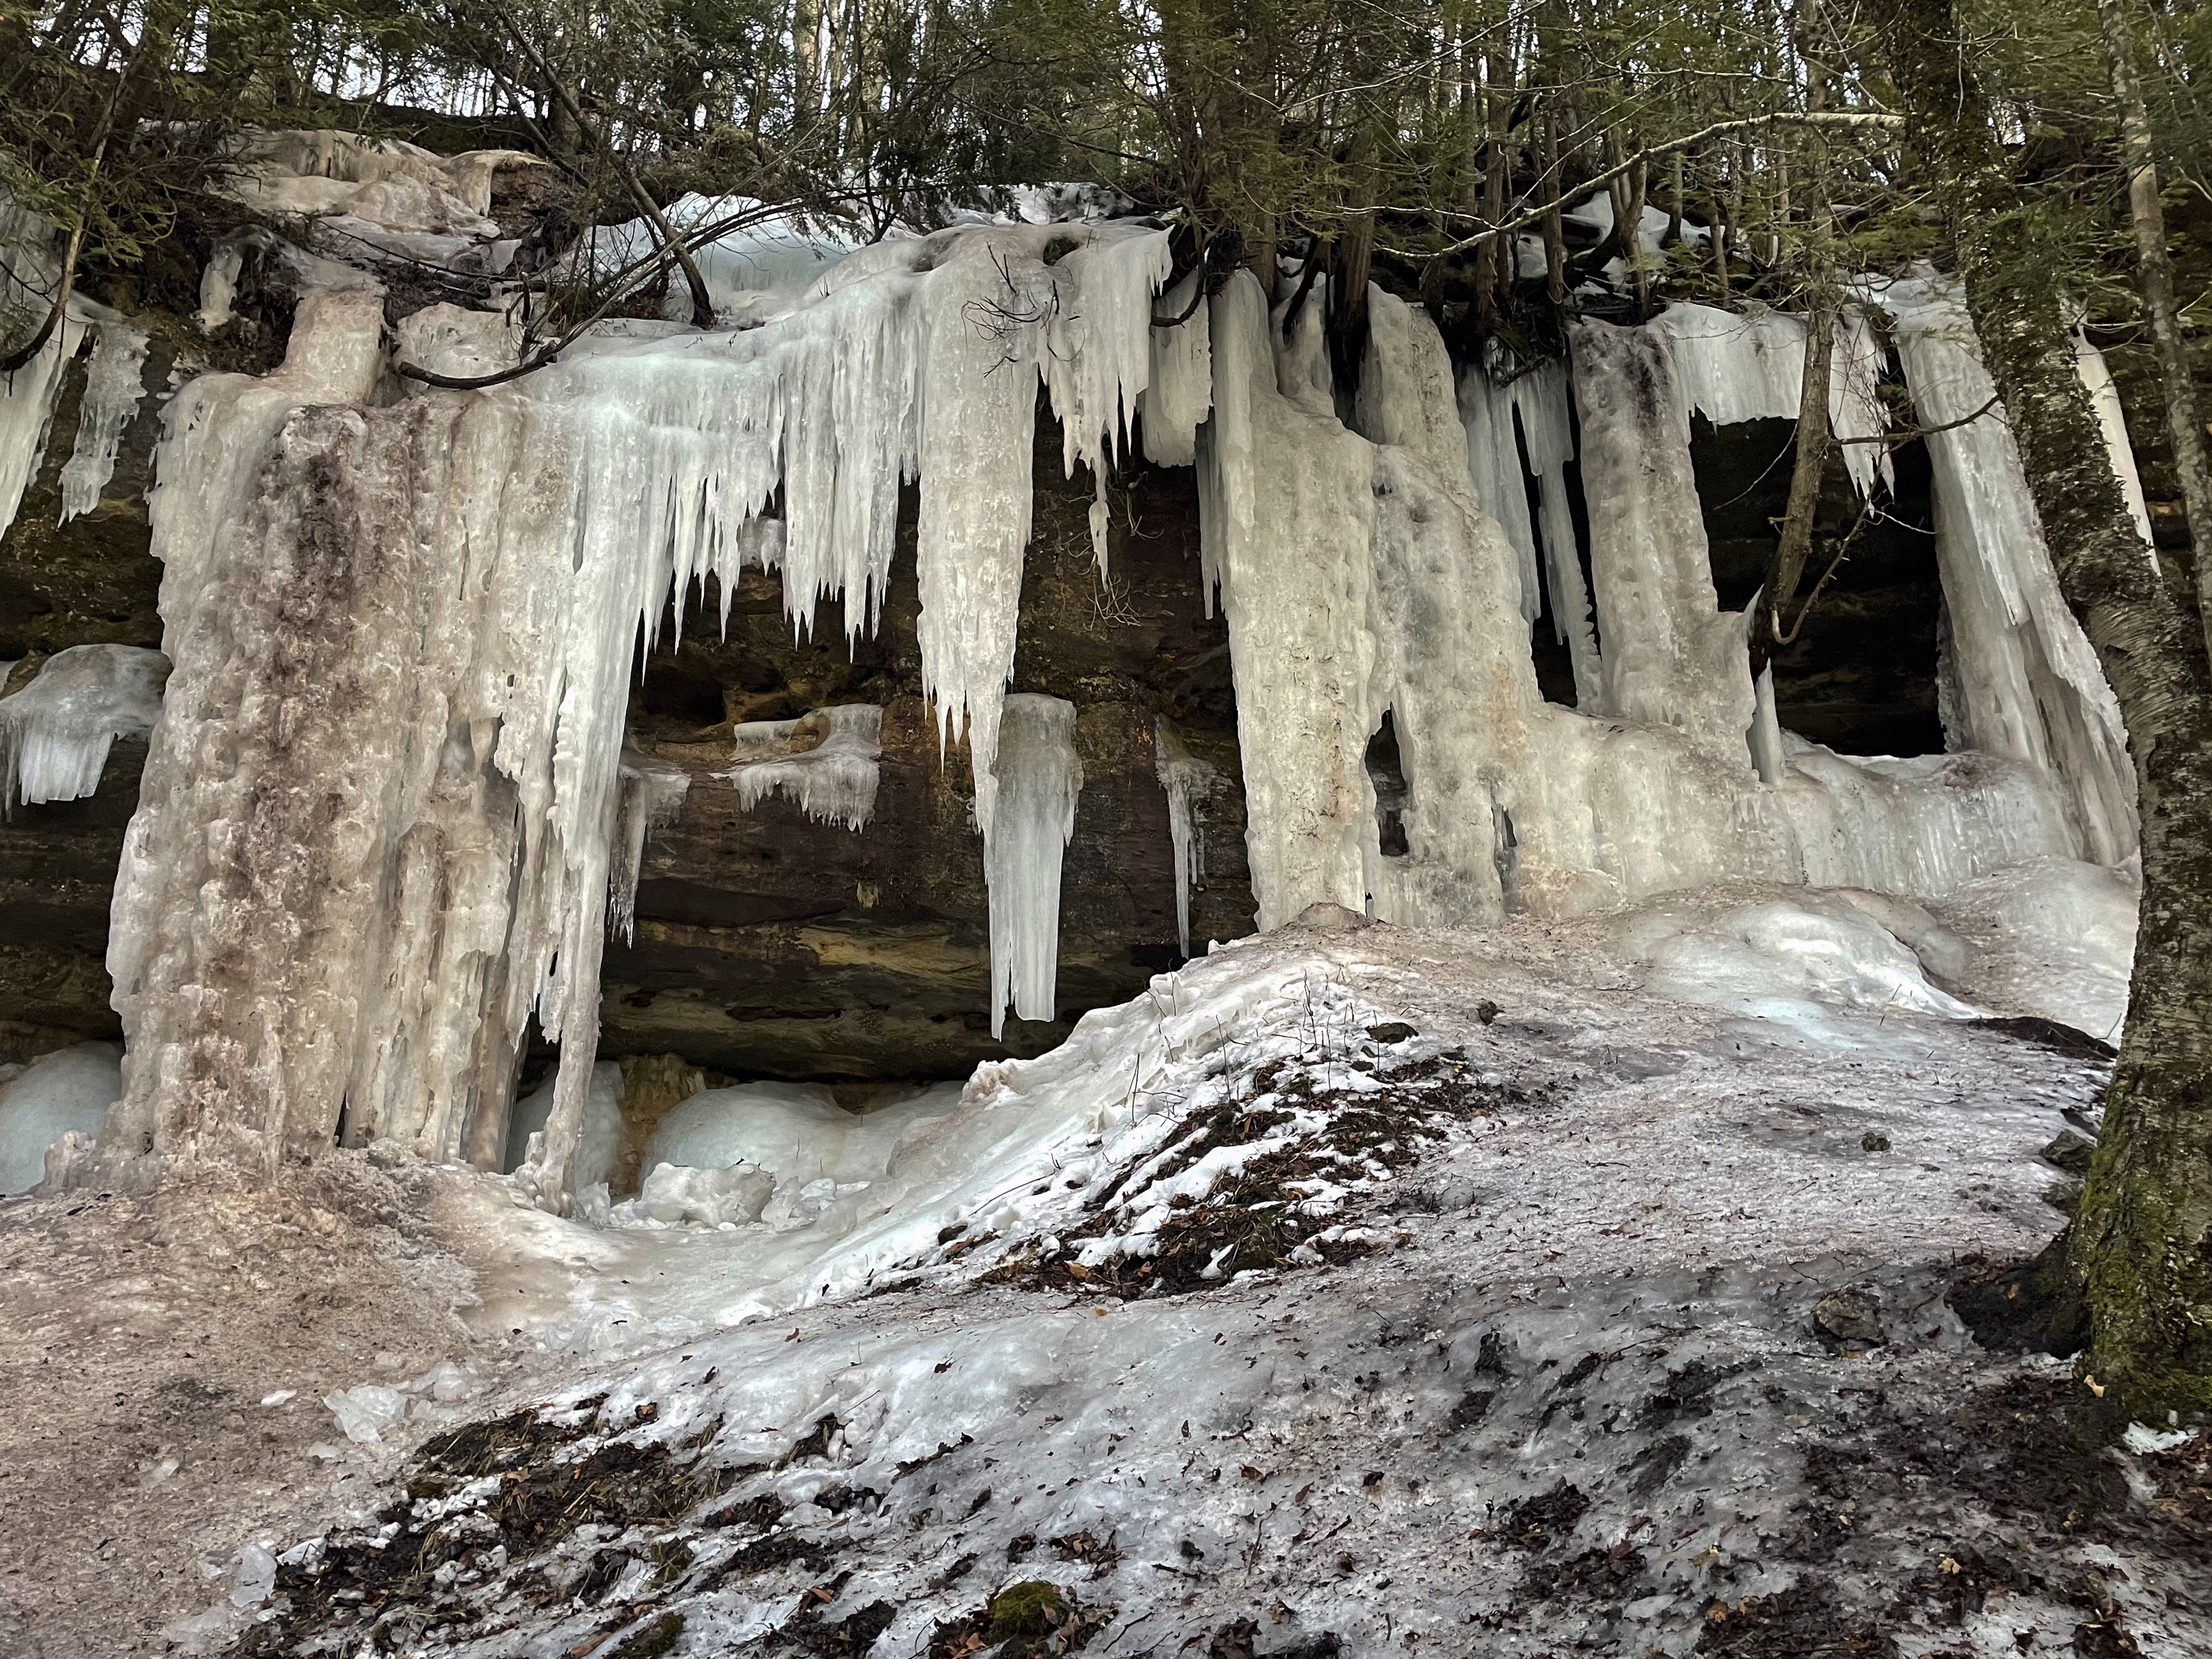 An ice climbing formation in very poor condition.